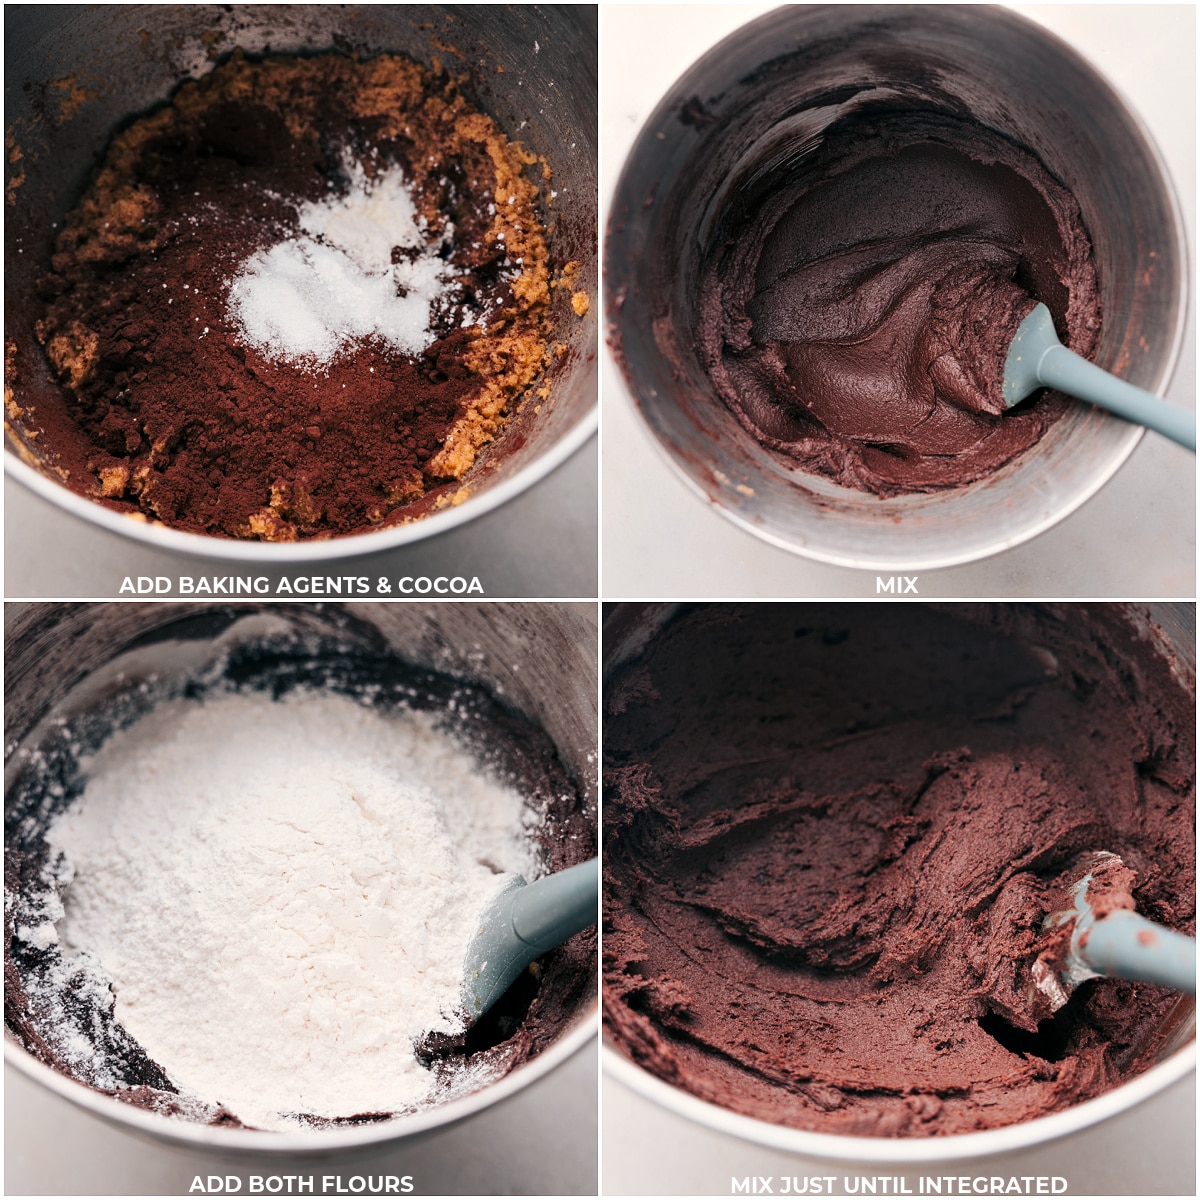 Baking agents, cocoa powder, and both types of flours being creamed together.